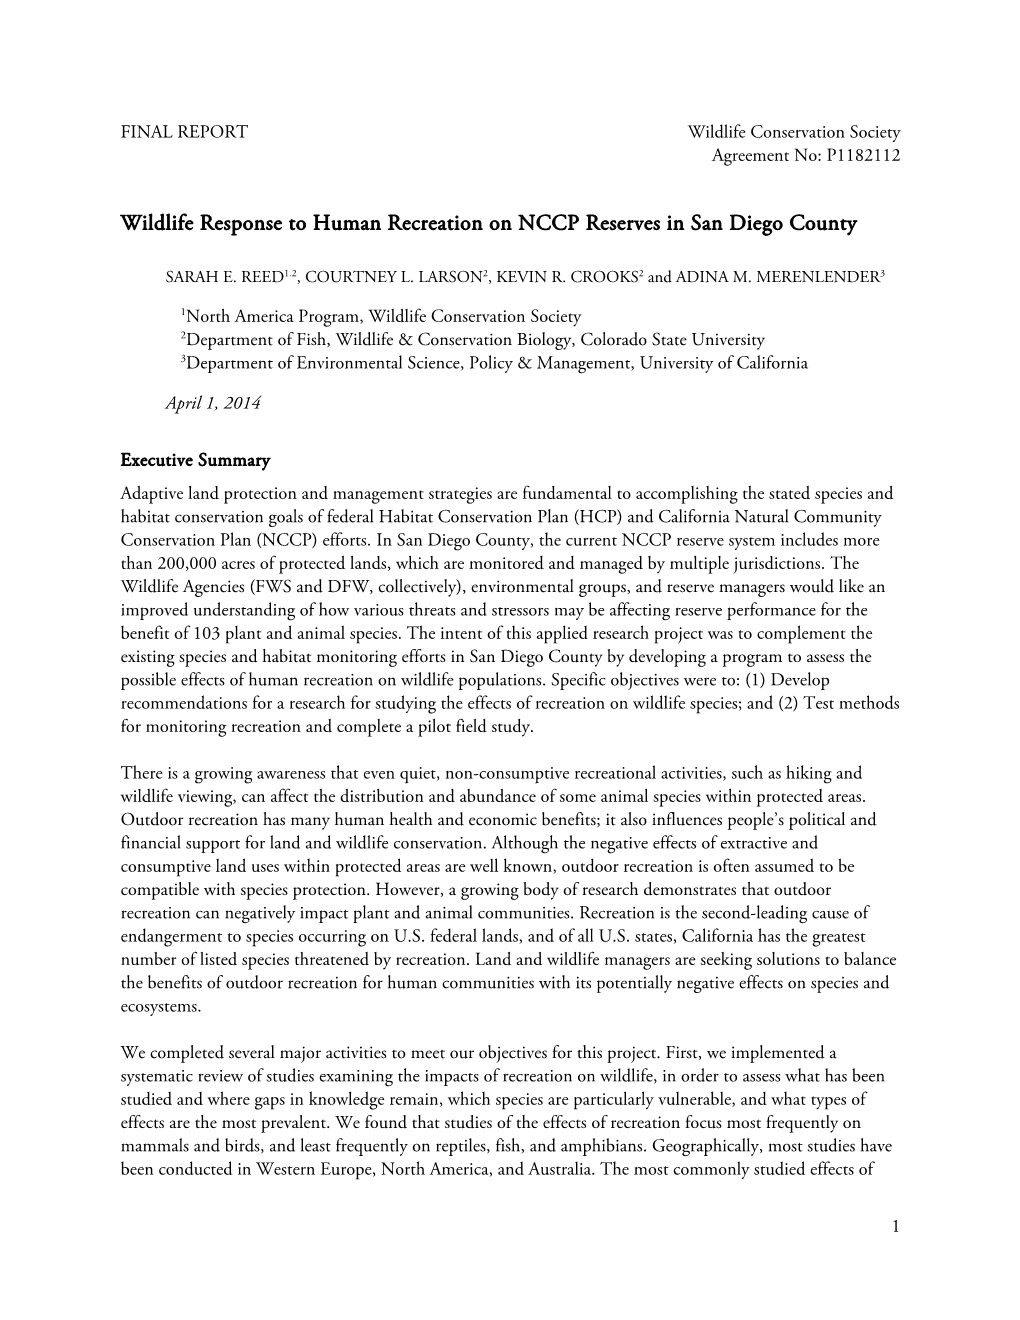 Wildlife Response to Human Recreation on NCCP Reserves in San Diego County